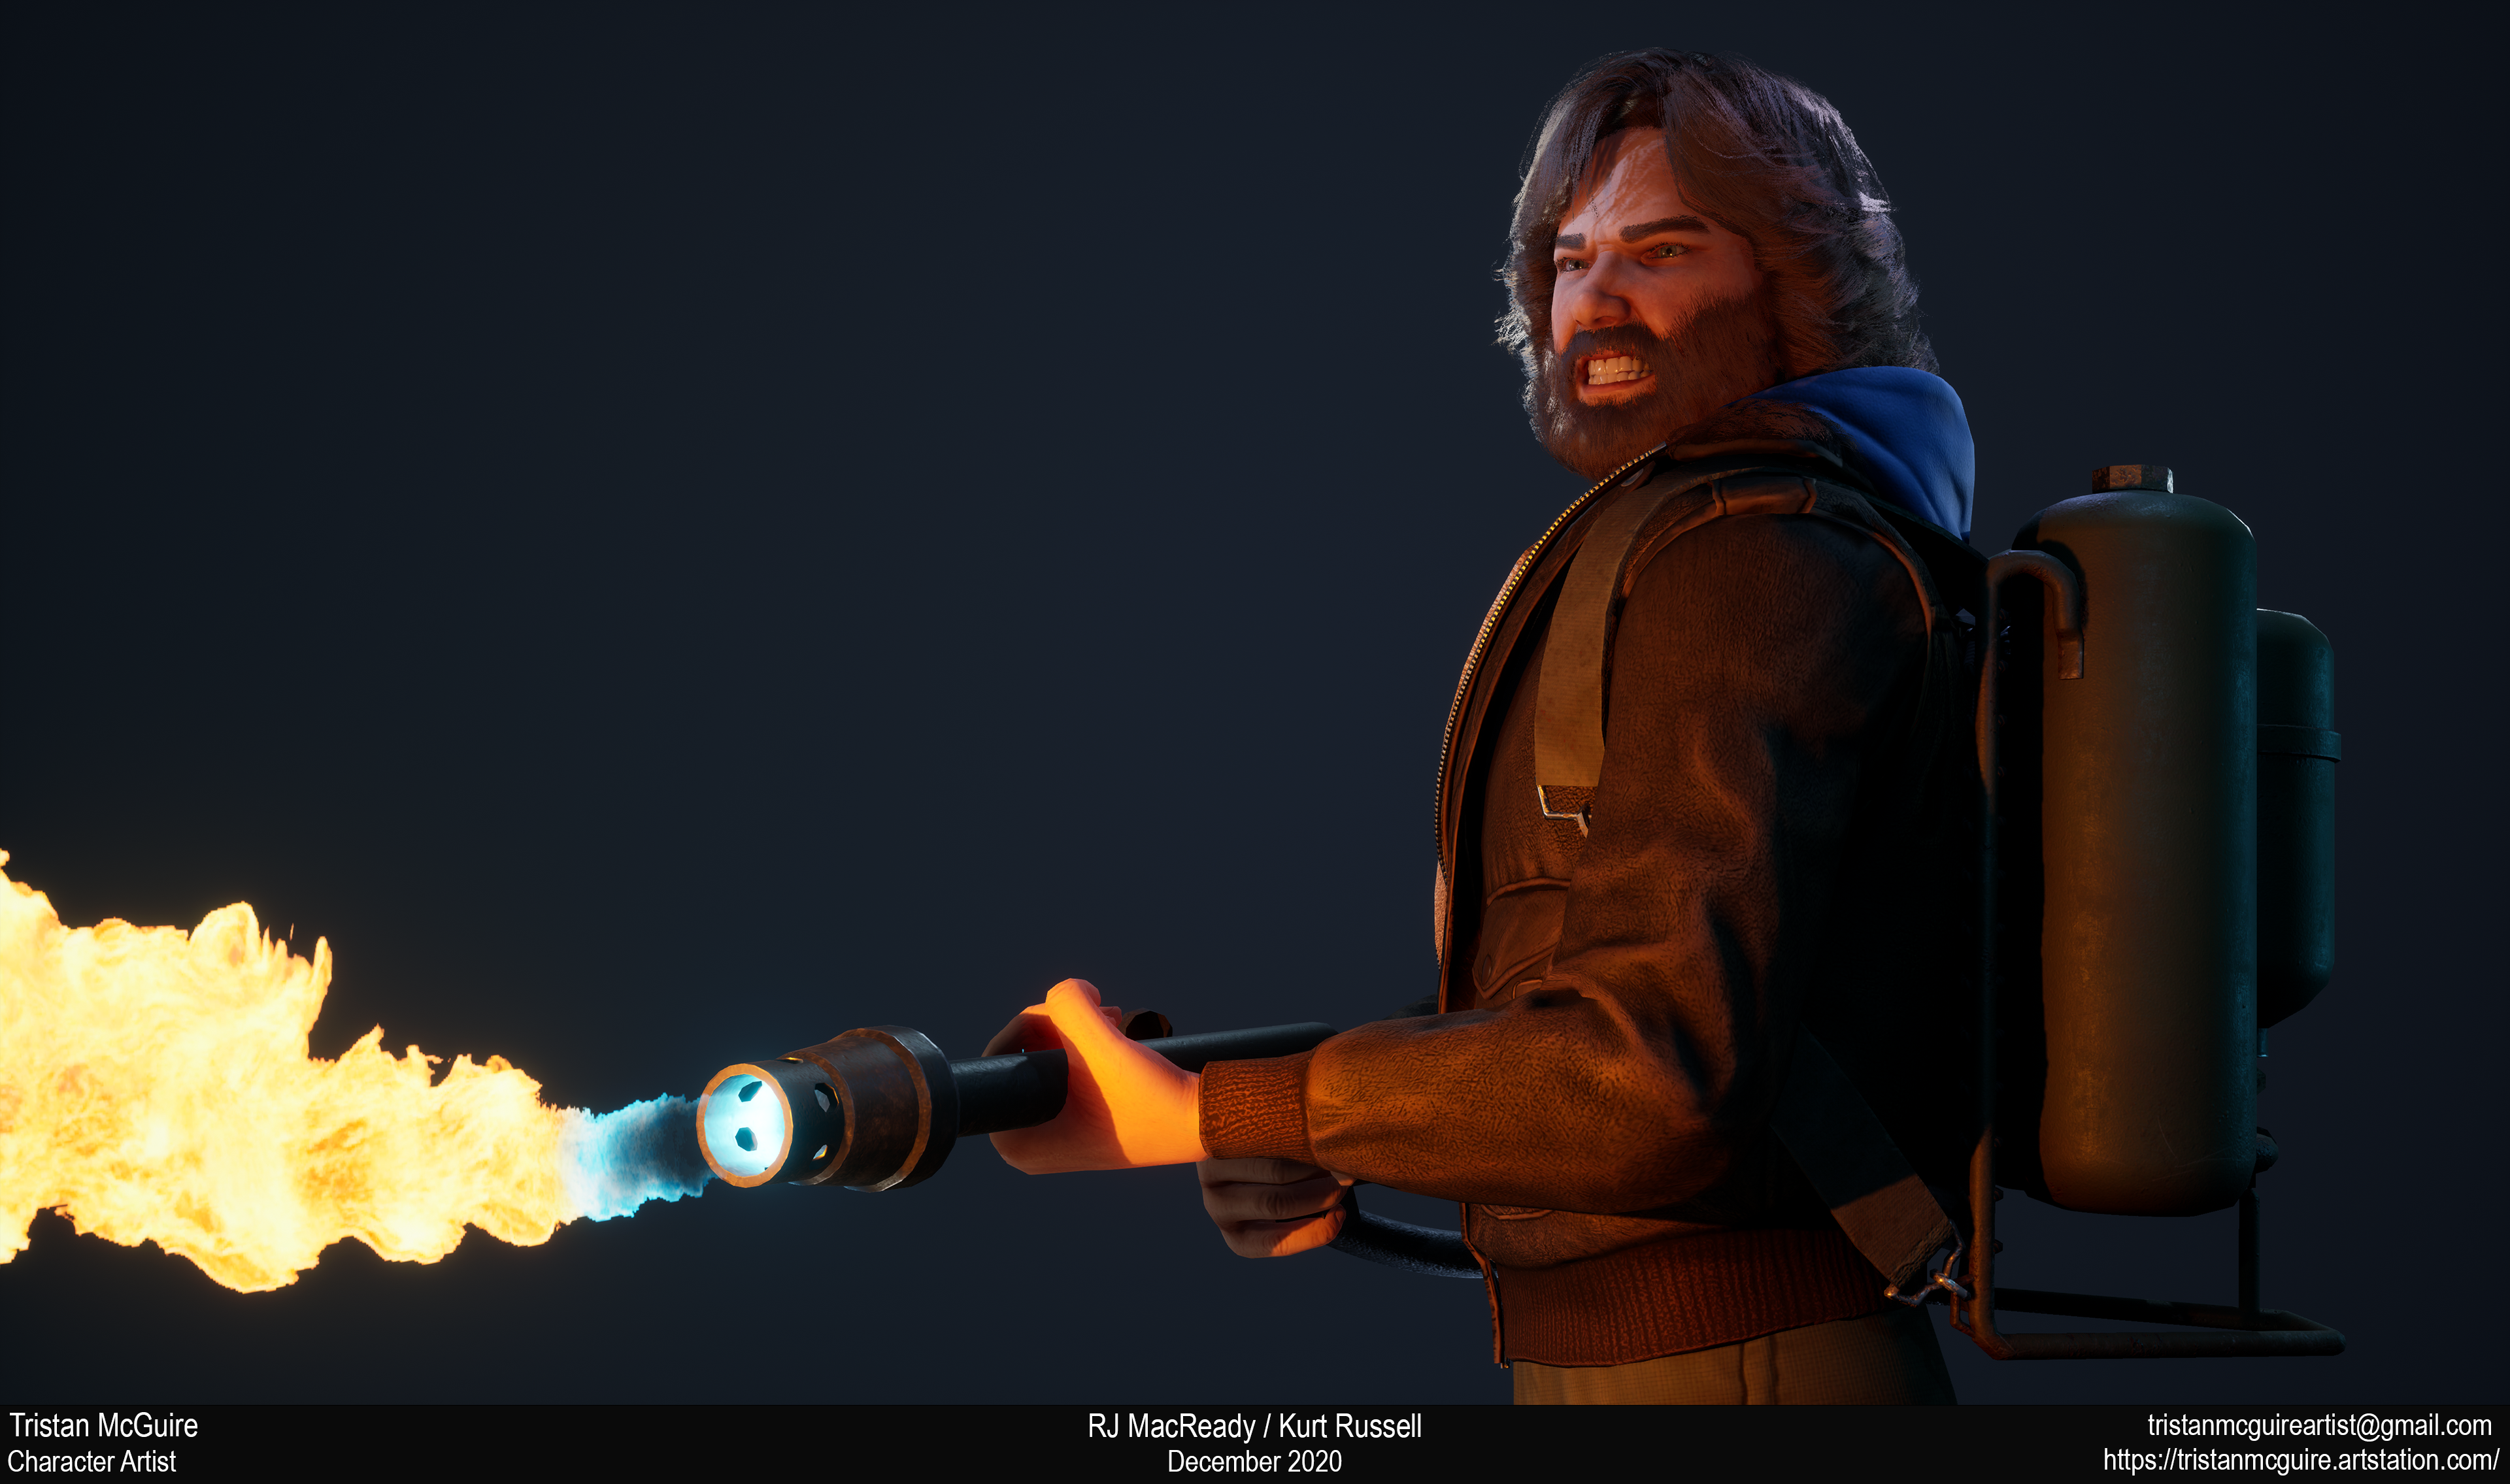 RJ MacReady designed by computer games student Tristan McGuire 